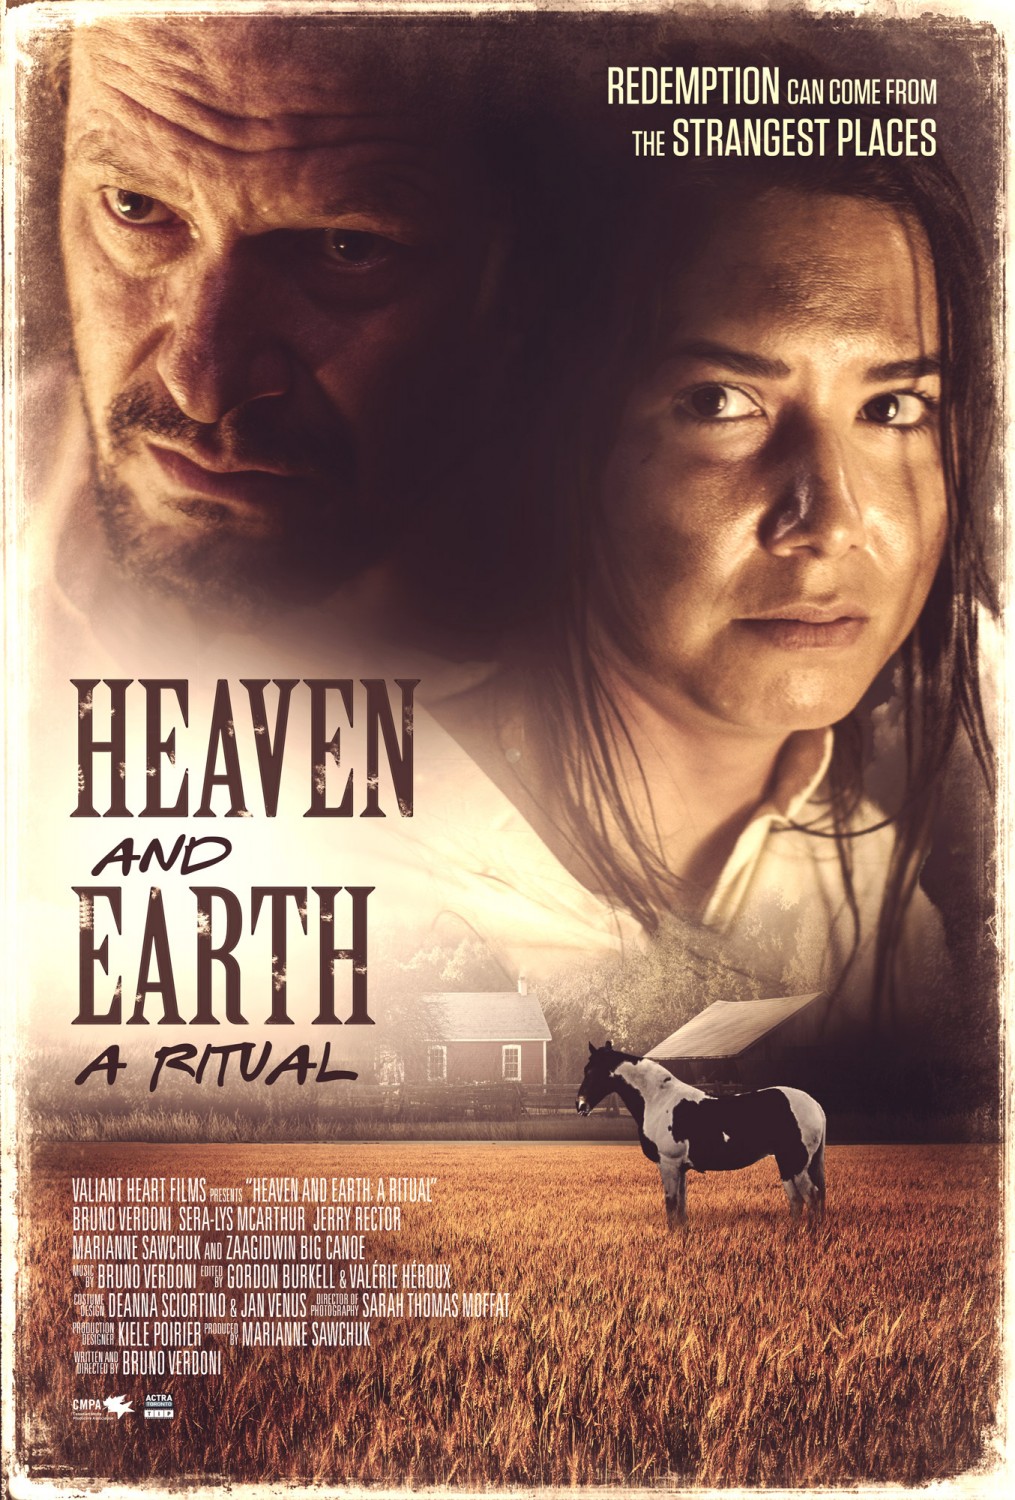 Extra Large Movie Poster Image for Heaven and Earth: A Ritual